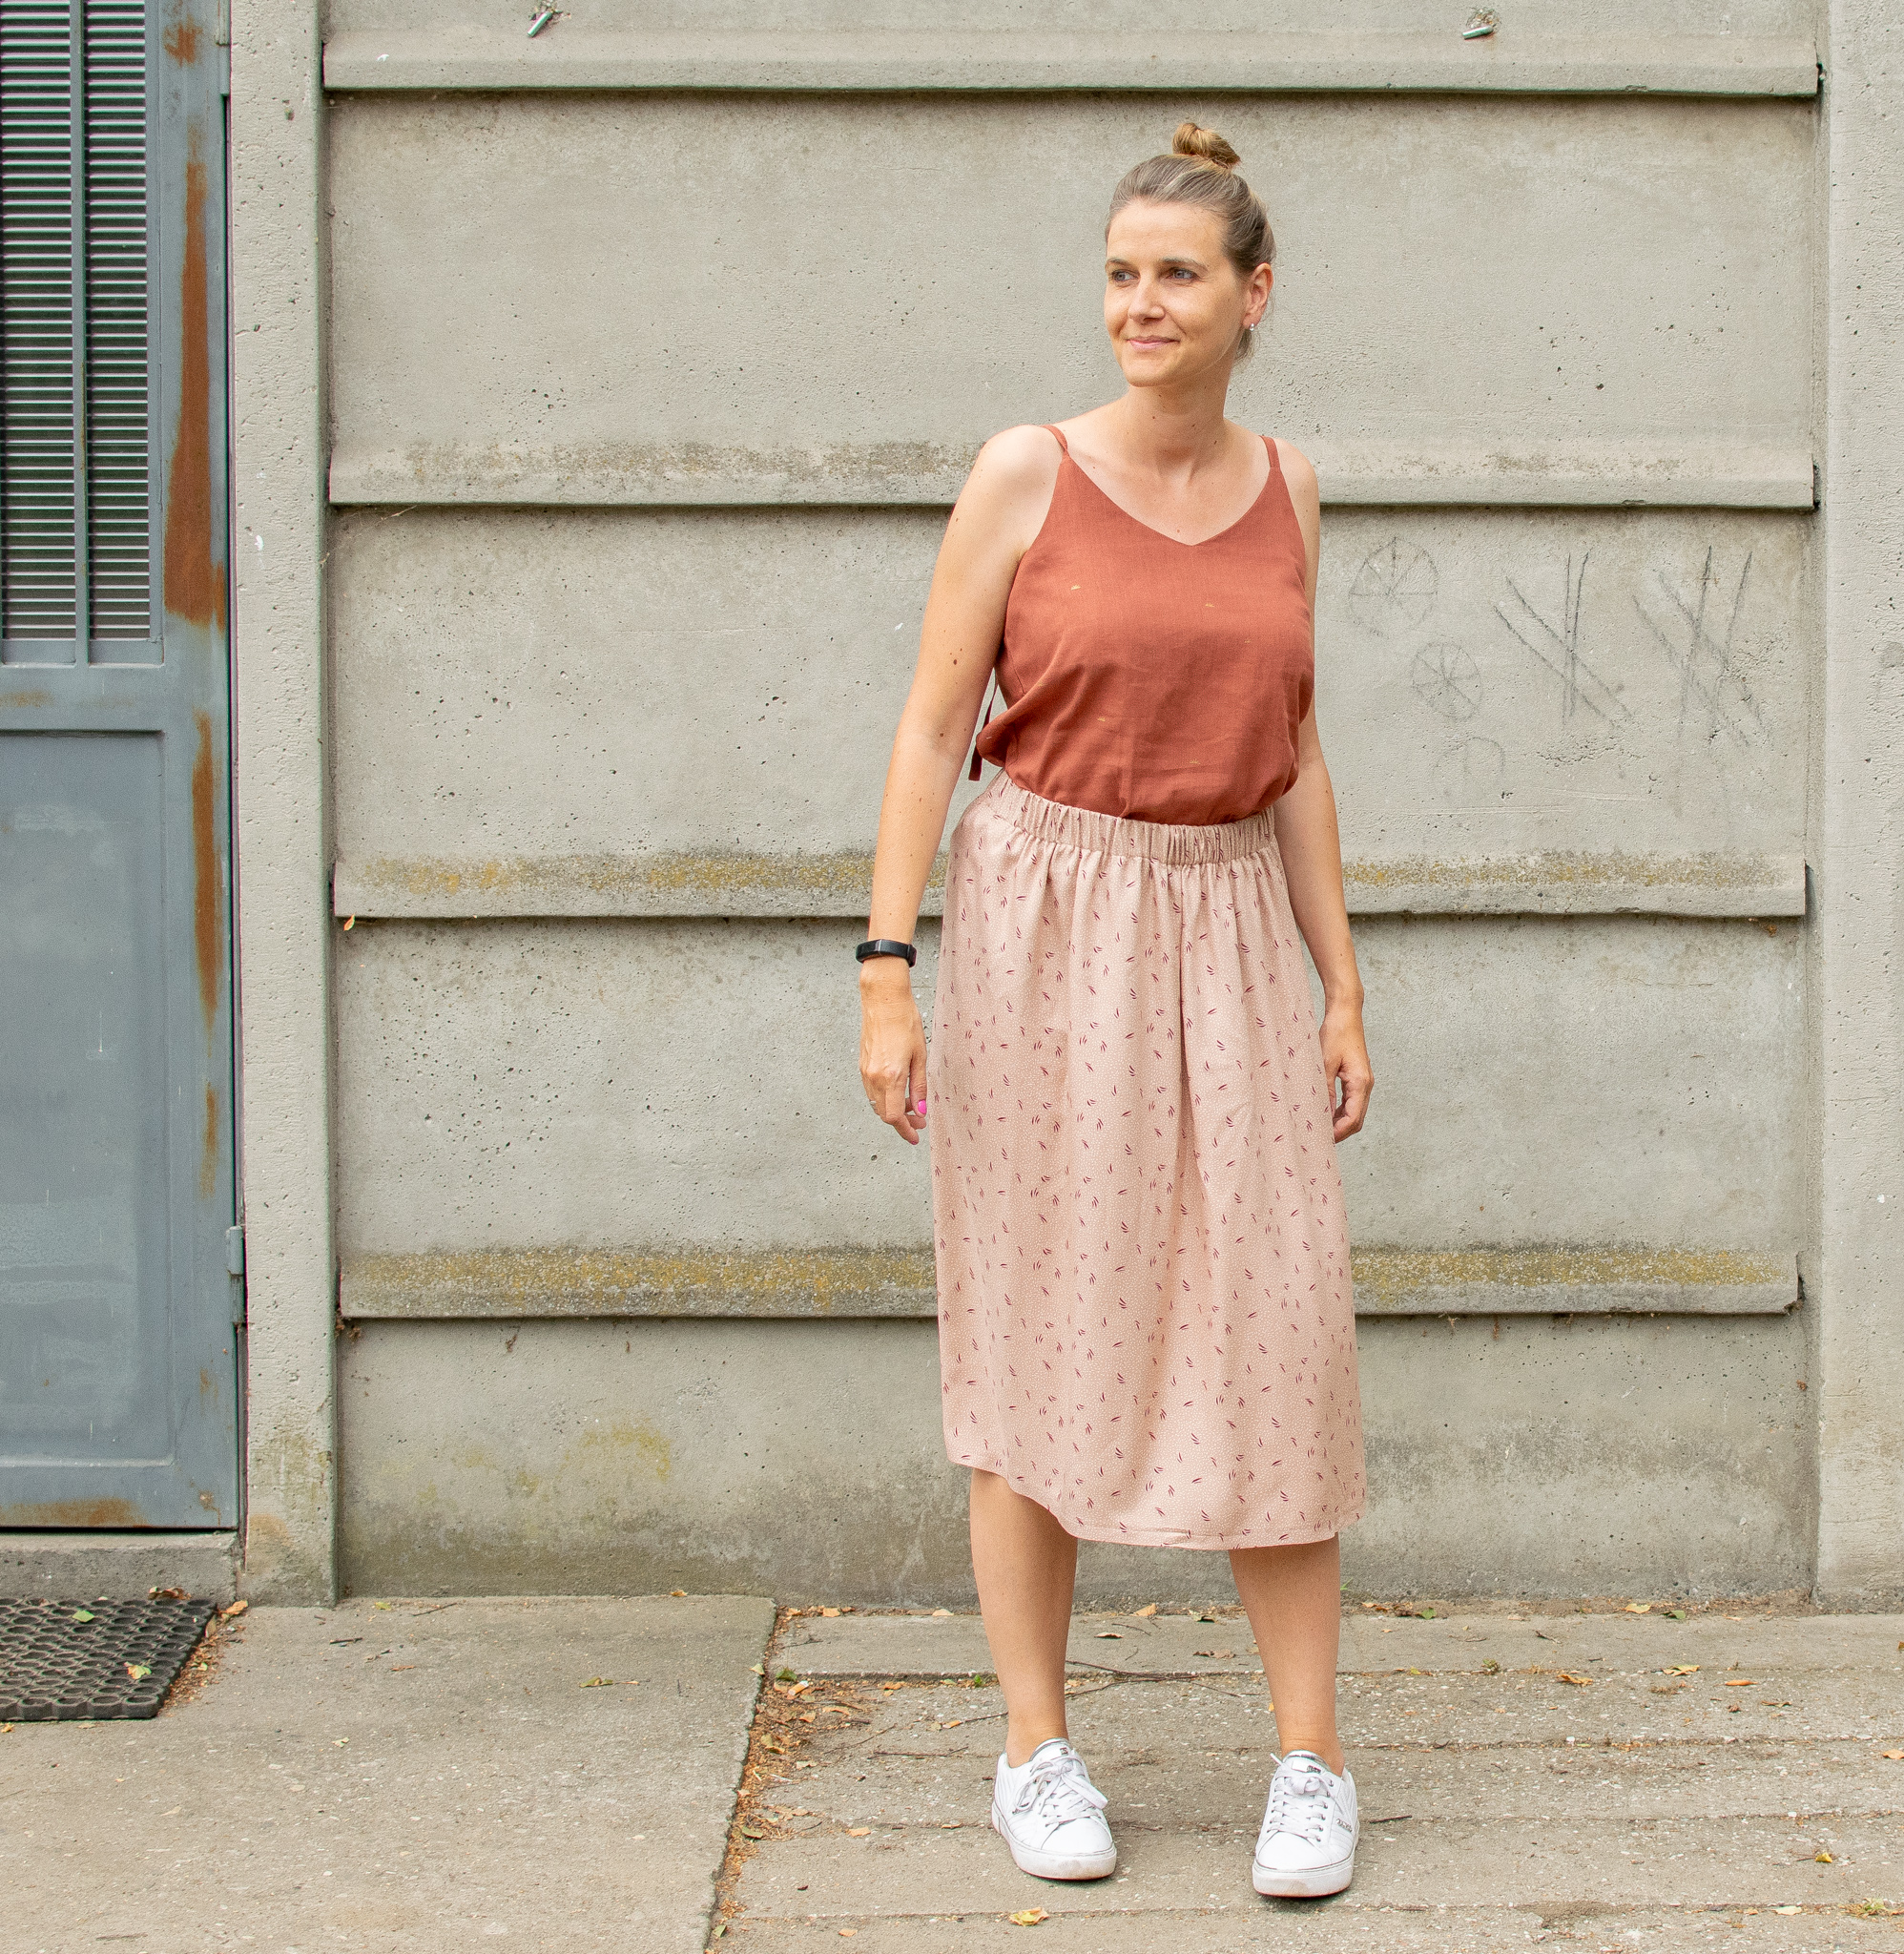 Skirt Alert: Embrace Simplicity And Style With Easy Skirt Sewing Patterns!